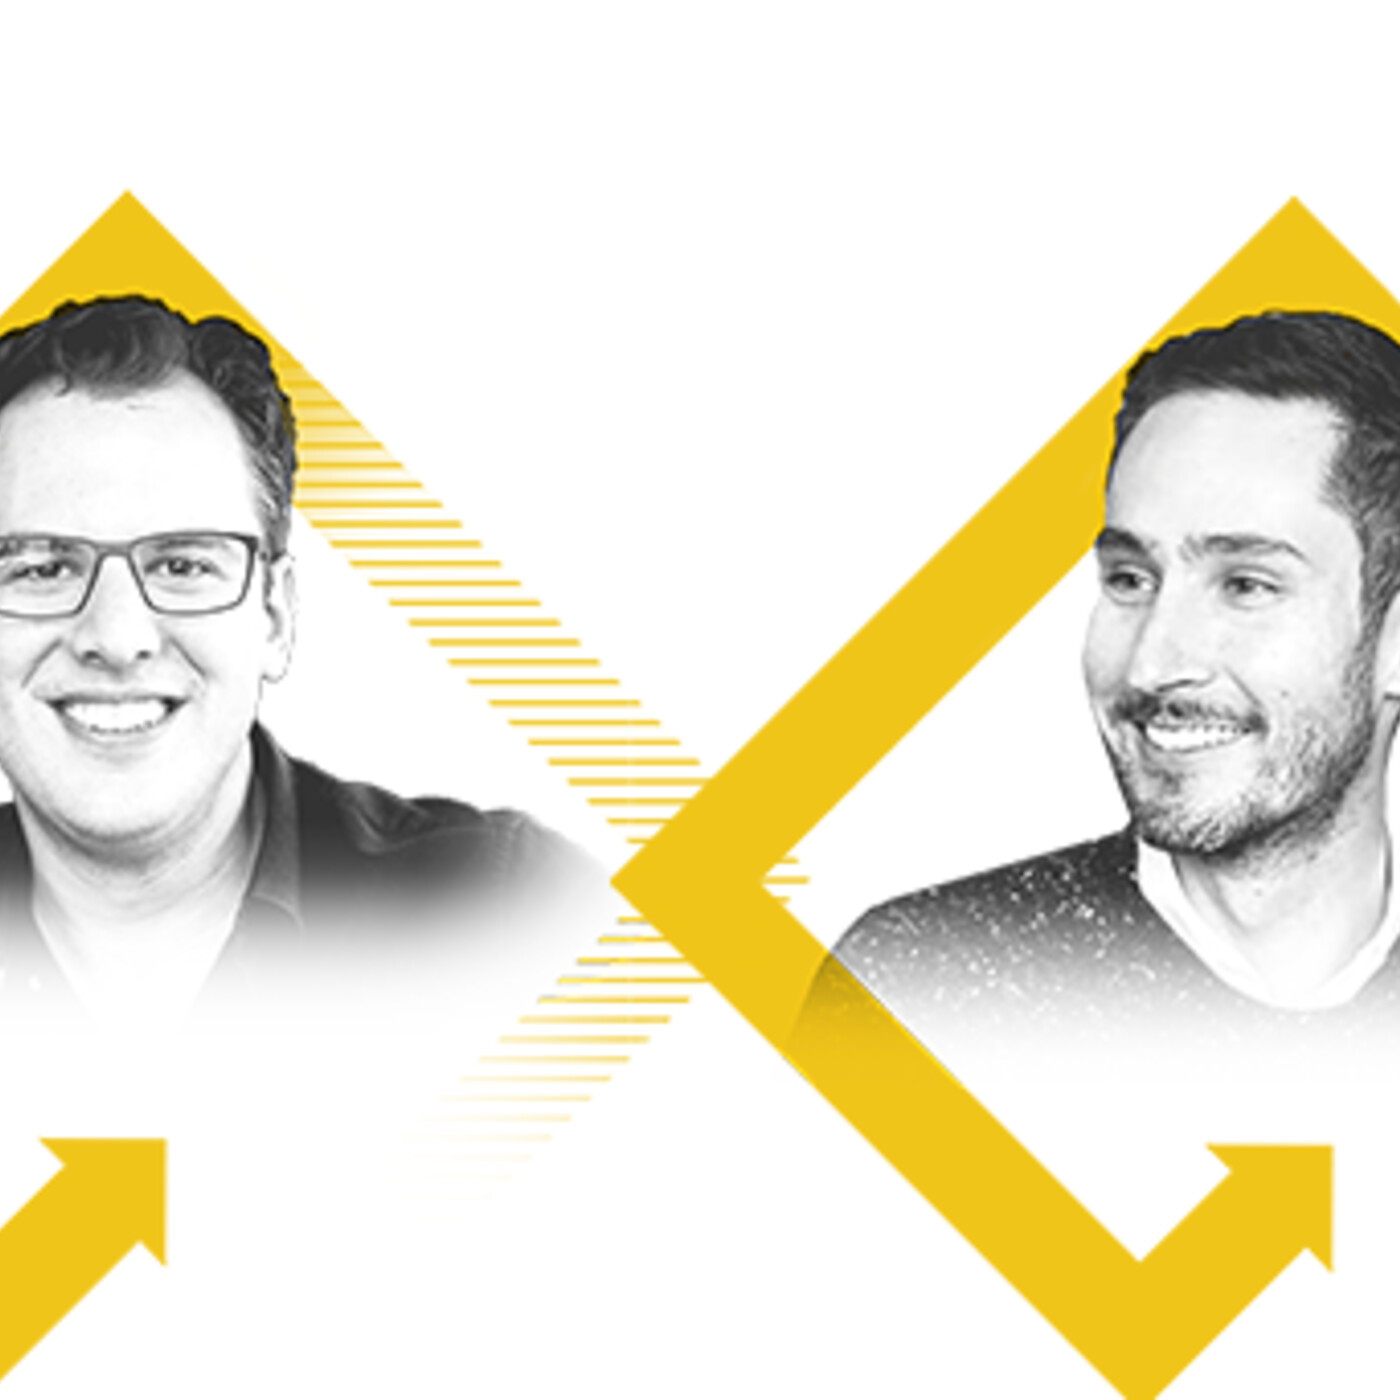 Live From The HIBT Summit: Kevin Systrom & Mike Krieger Of Instagram